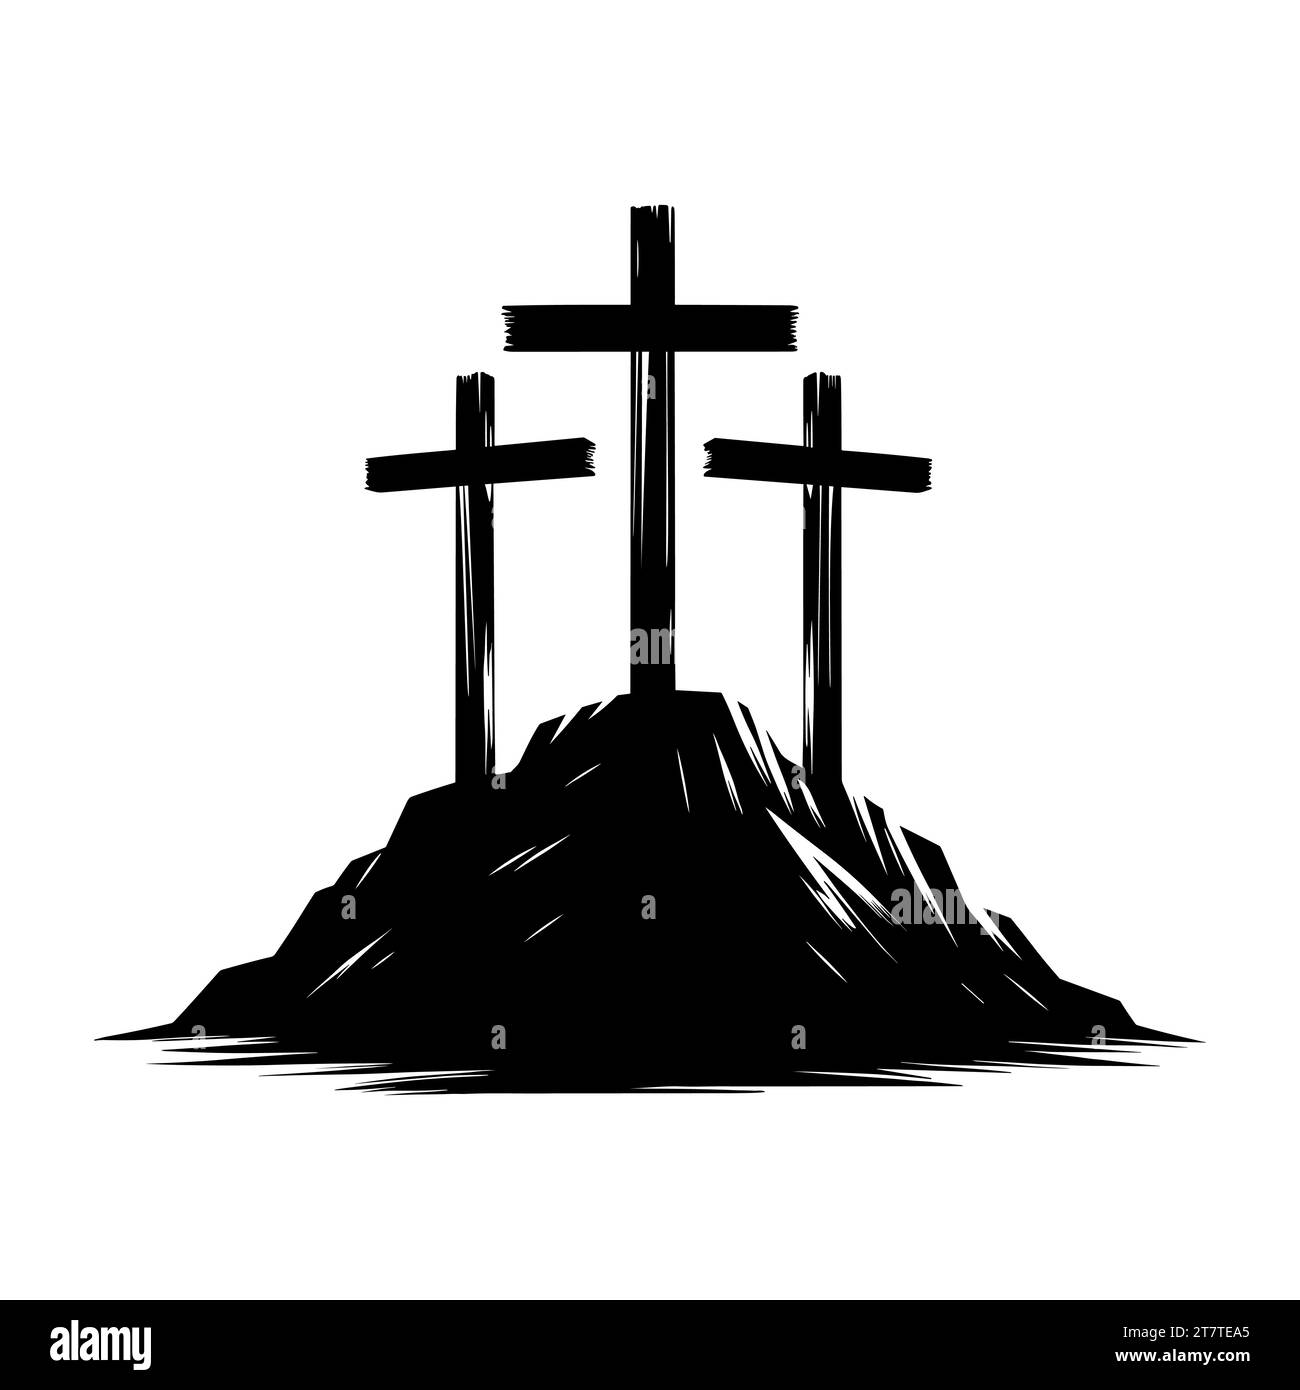 Calvary icon. Black silhouette of a crosses on Calvary hill. Religious icon on white background. Vector illustration. Stock Vector